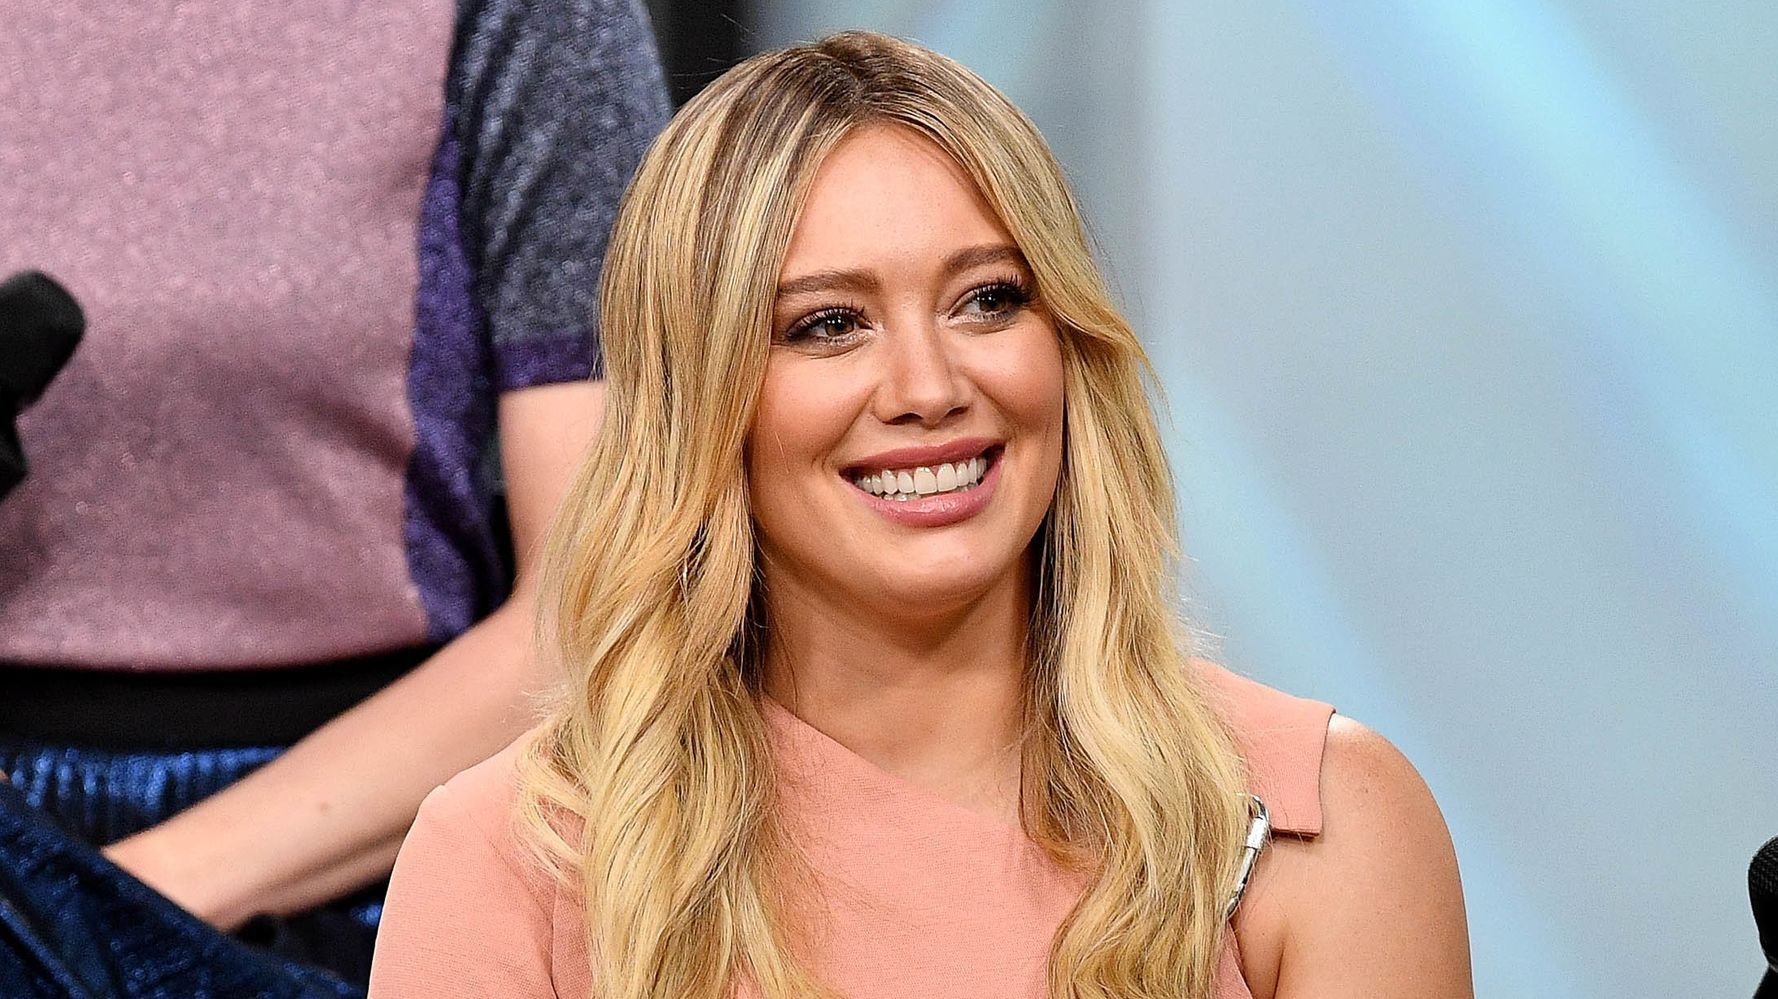 Hilary Duff Shared This Moving Poem That's Resonating With Parents.